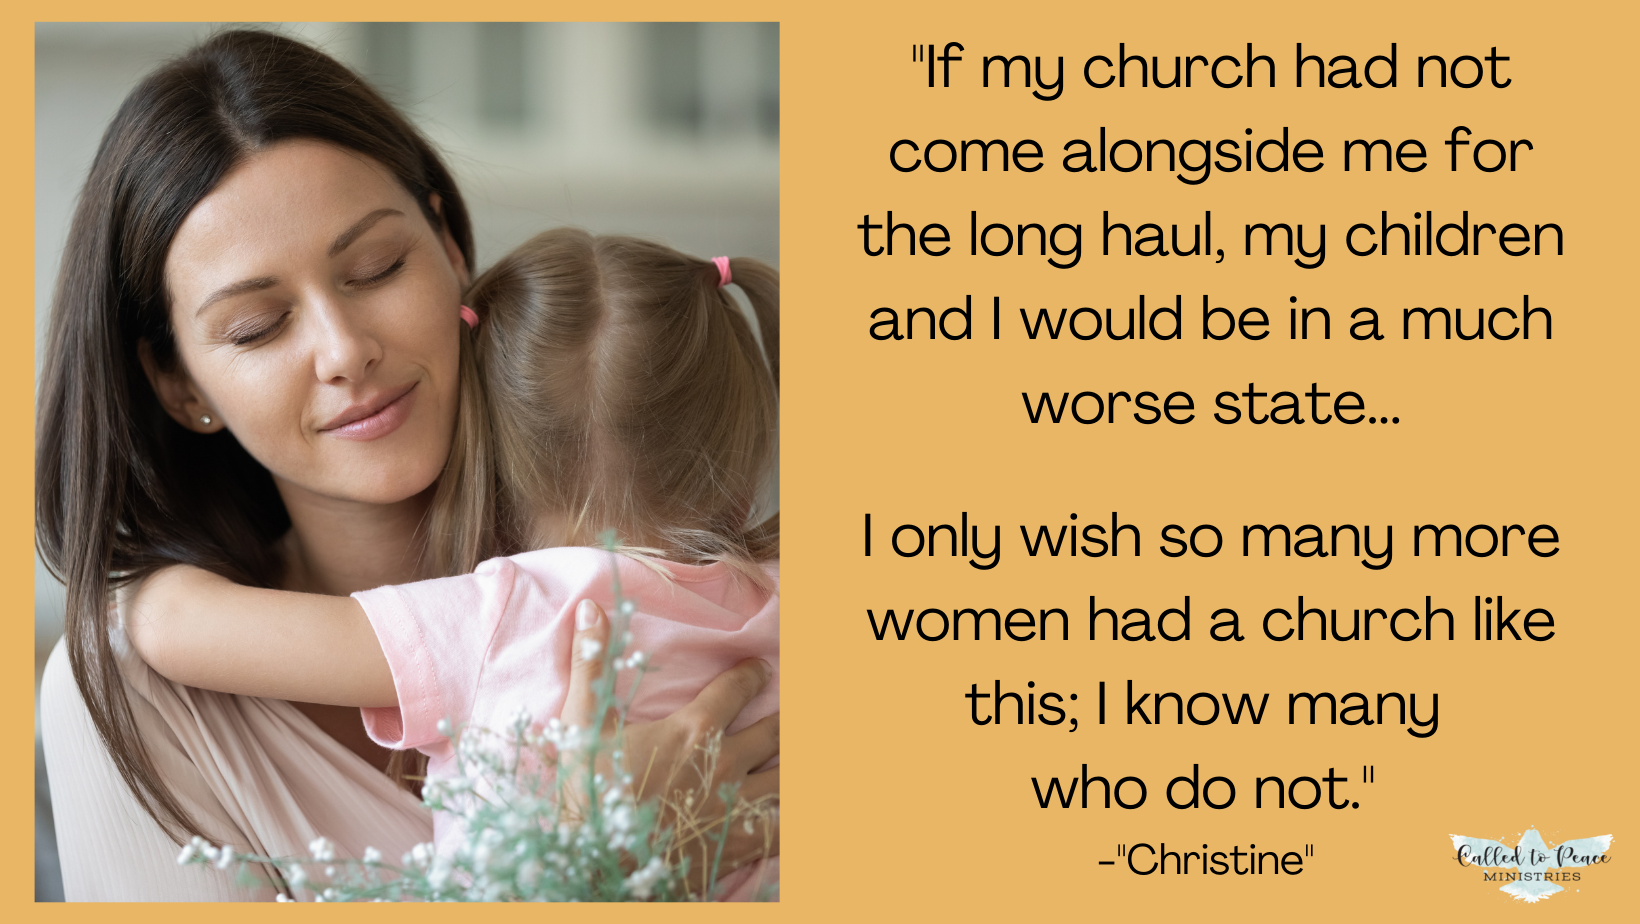 “Christine’s” Church Introduced Her to Love After Abuse